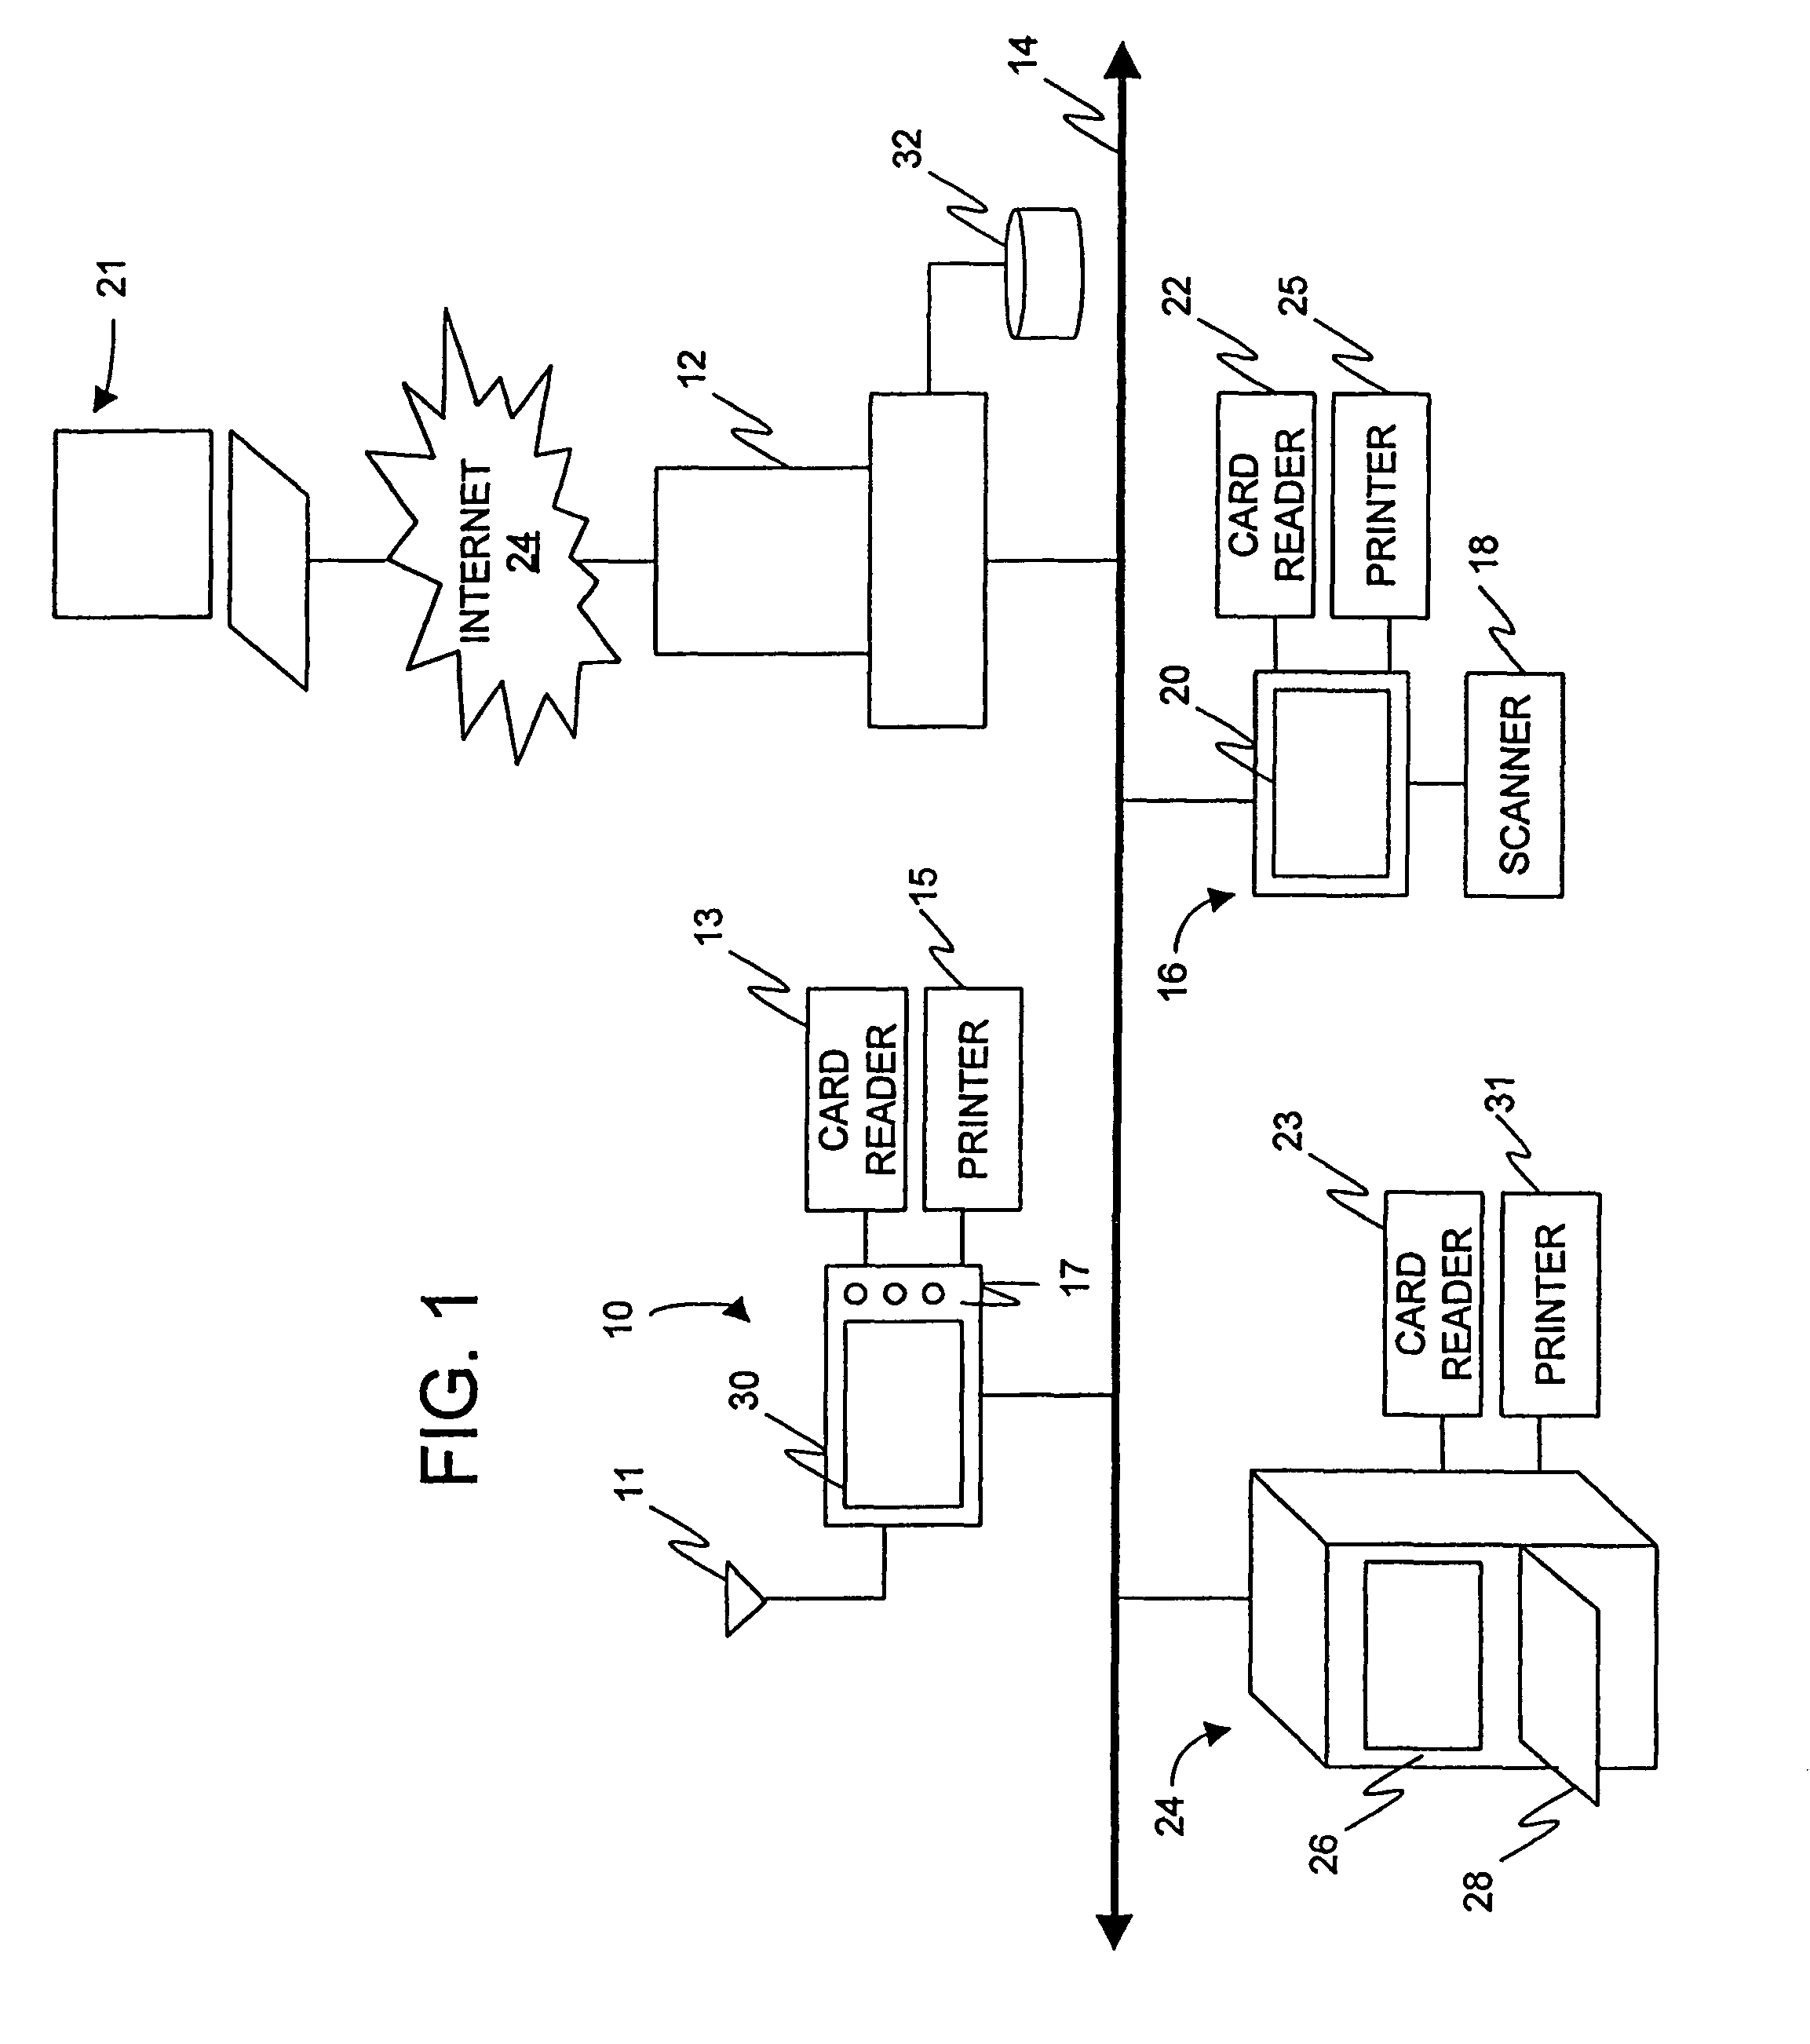 System and method for automated recipe selection and shopping list creation